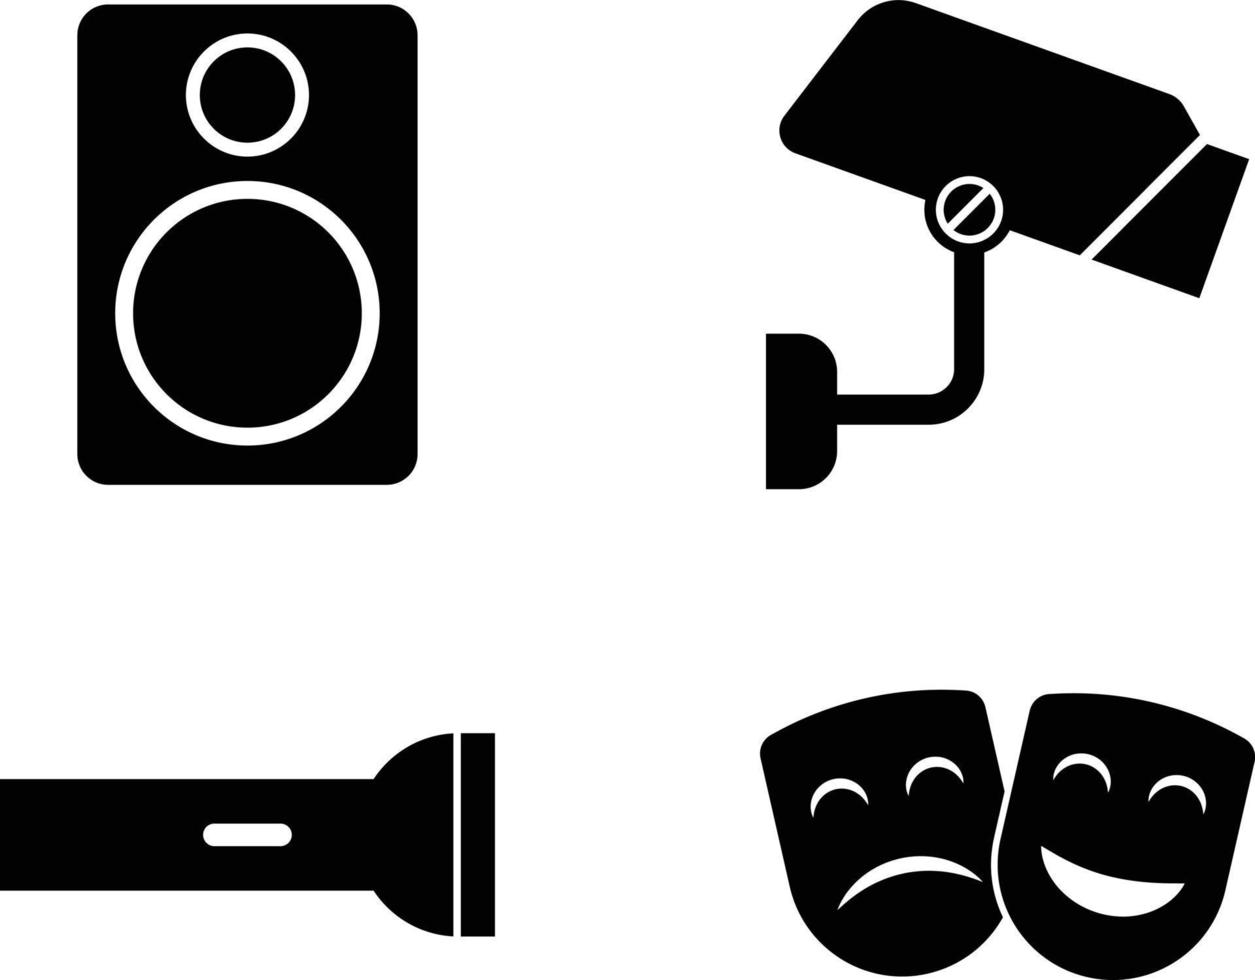 Music Speaker, Surveillance or Security Camera, Theater Happy and Sad Face Mask and Flashlight Torch Icon Set vector